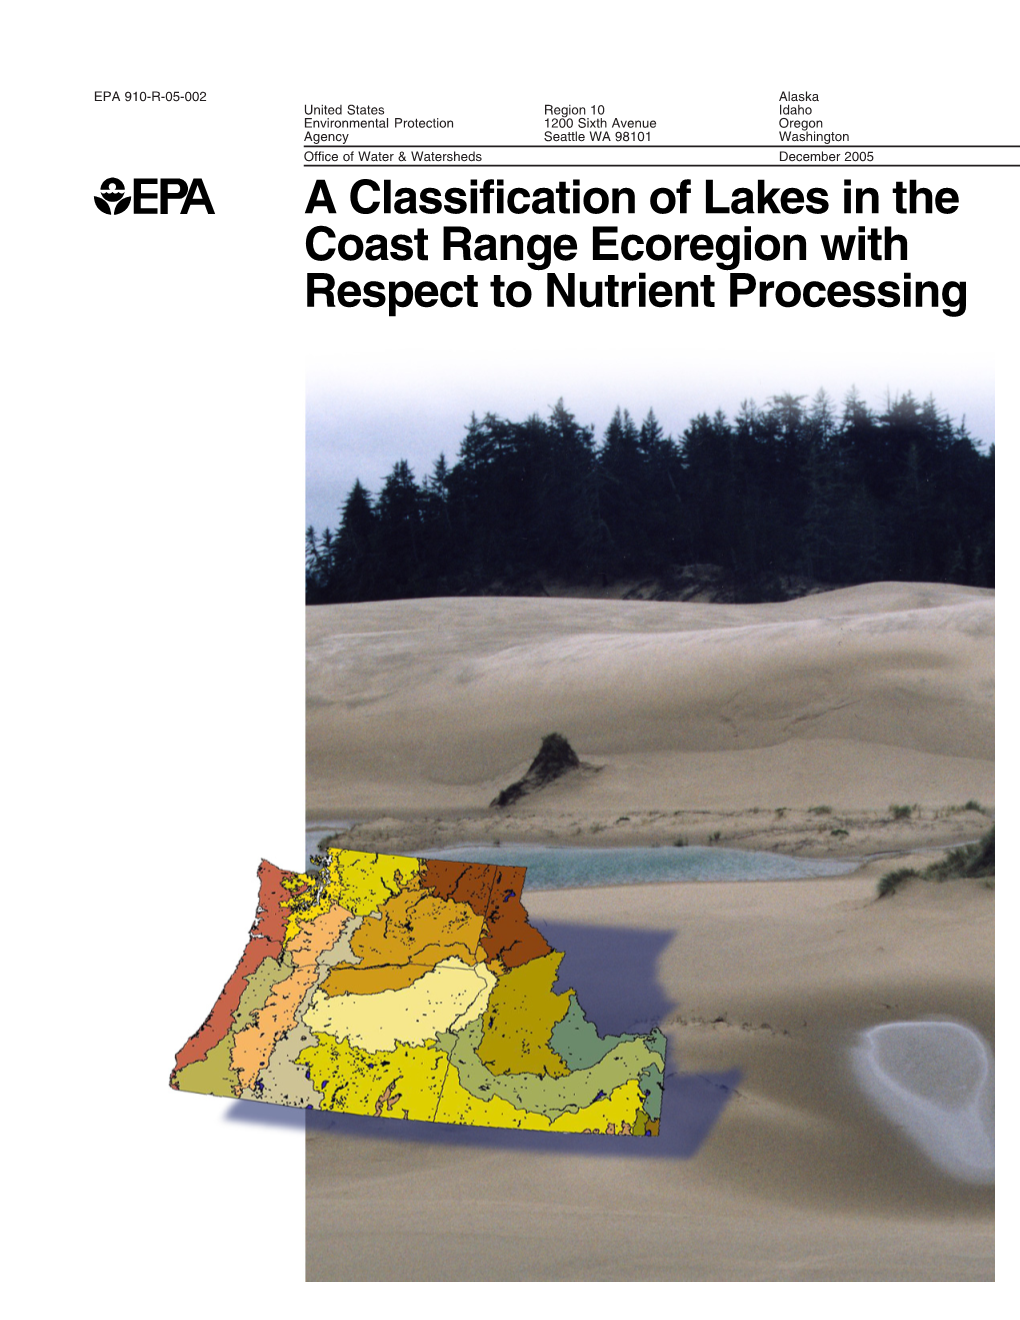 A Classification of Lakes in the Coast Range Ecoregion with Respect to Nutrient Processing EPA 910-R-05-002 December 2005